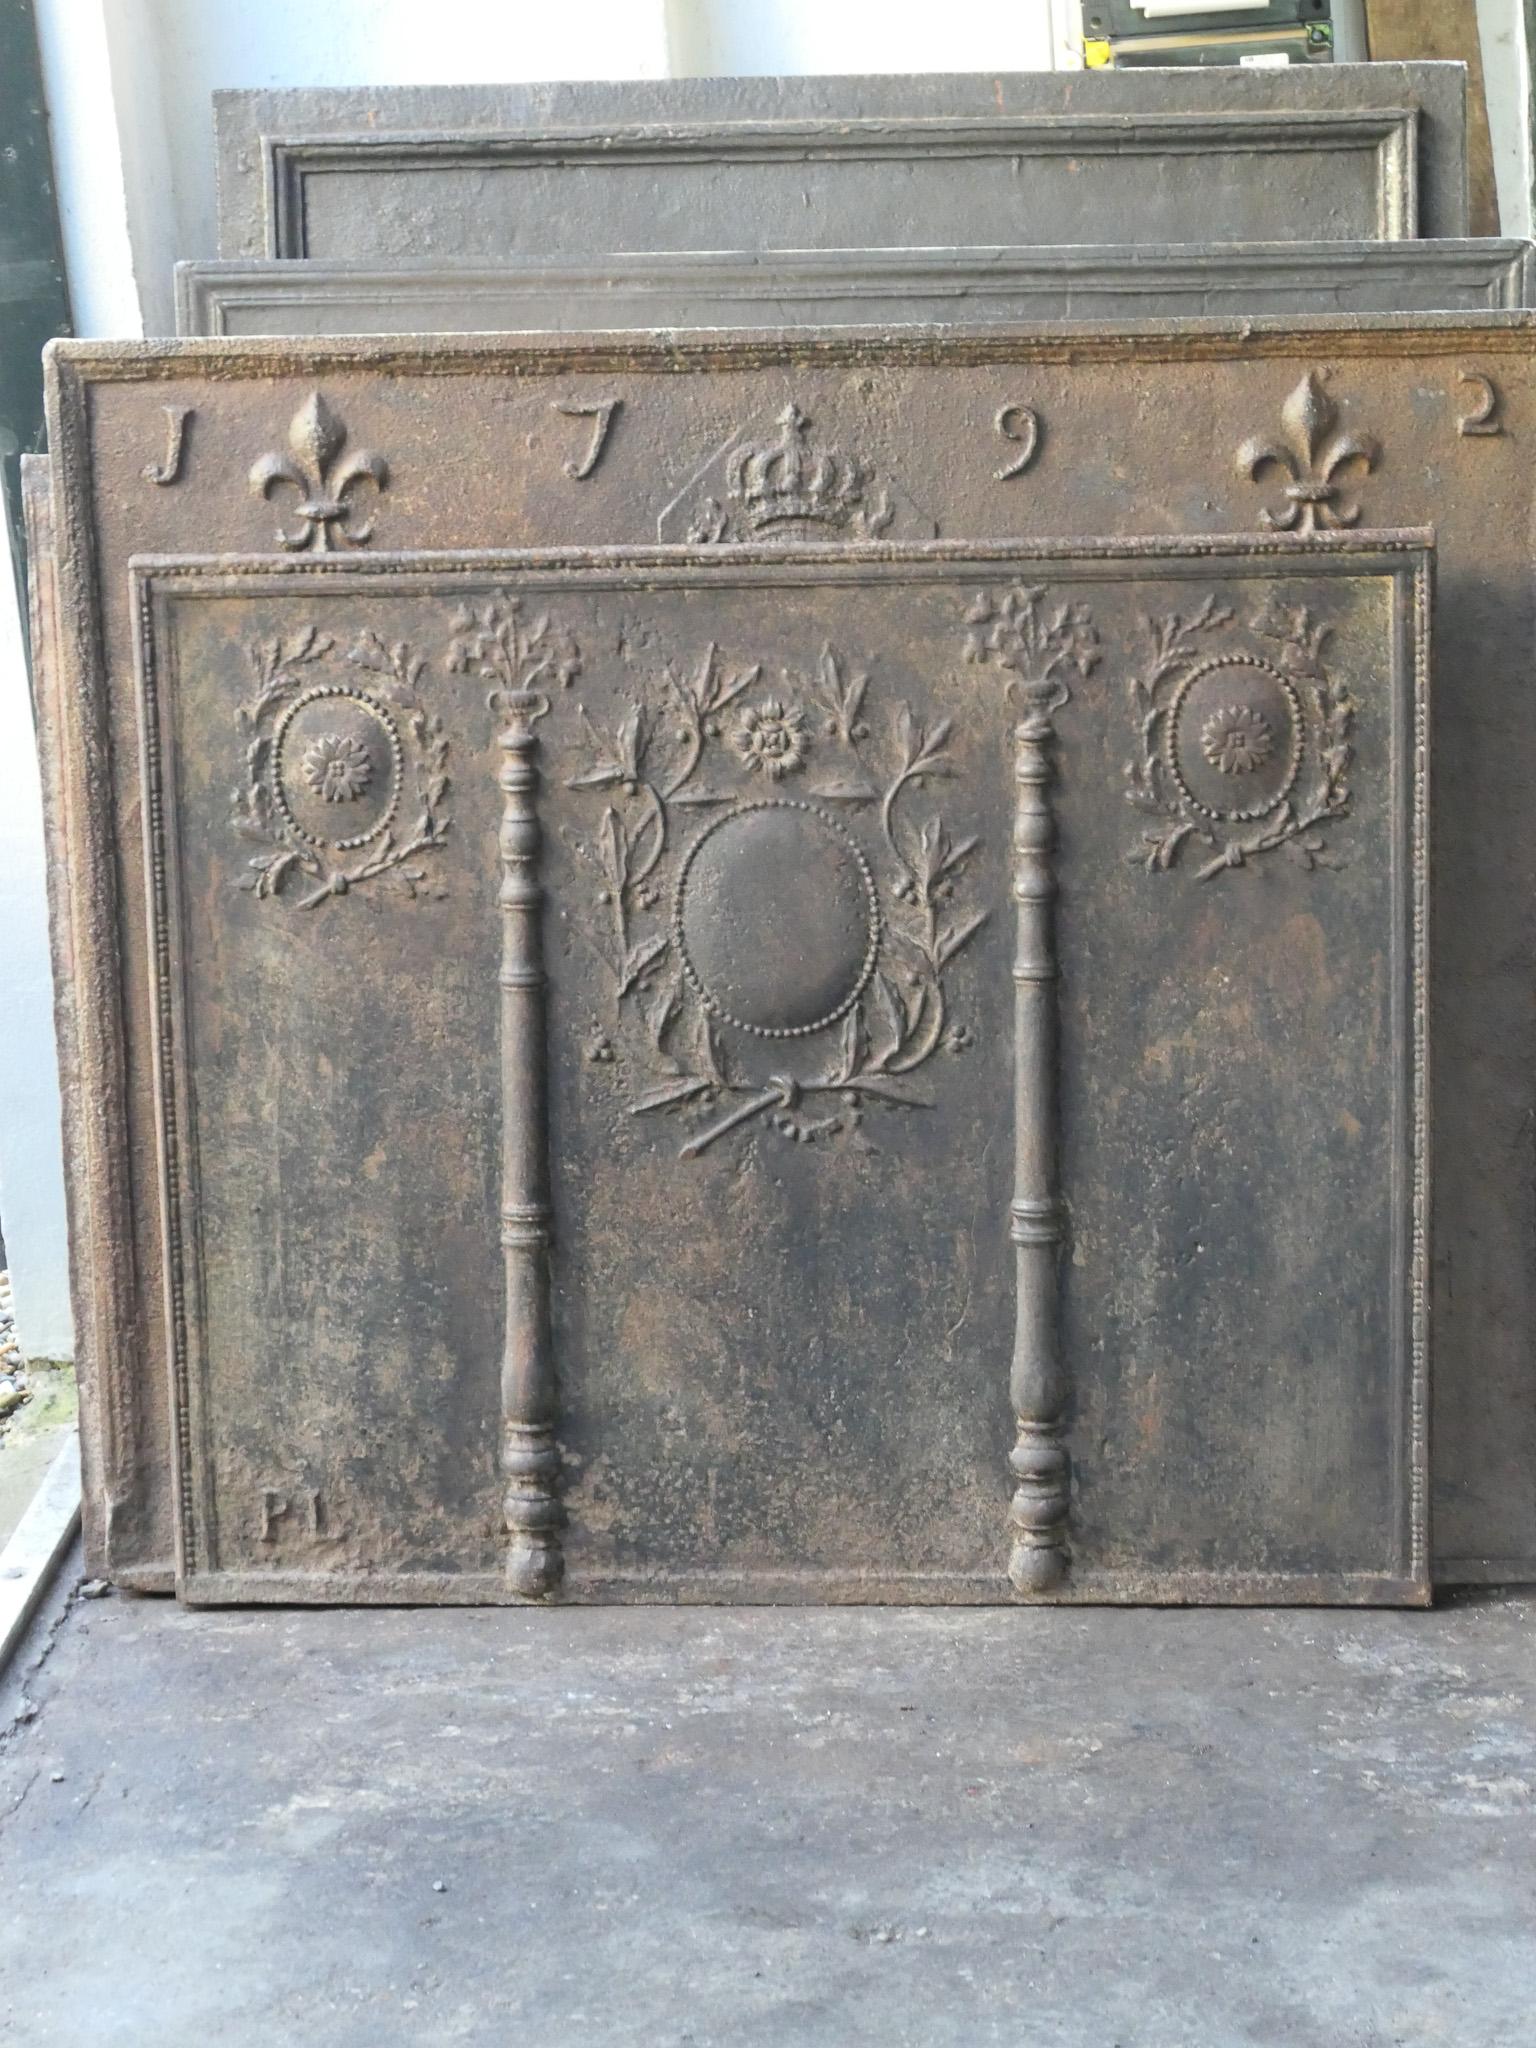 Beautiful 18th/19th century French Neoclassical fireback with flower decorations and two pillars. The pillars refer to the club of Hercules and stand for strength and the unknown. Towards the end of the 18th century and the start of the Louis XV